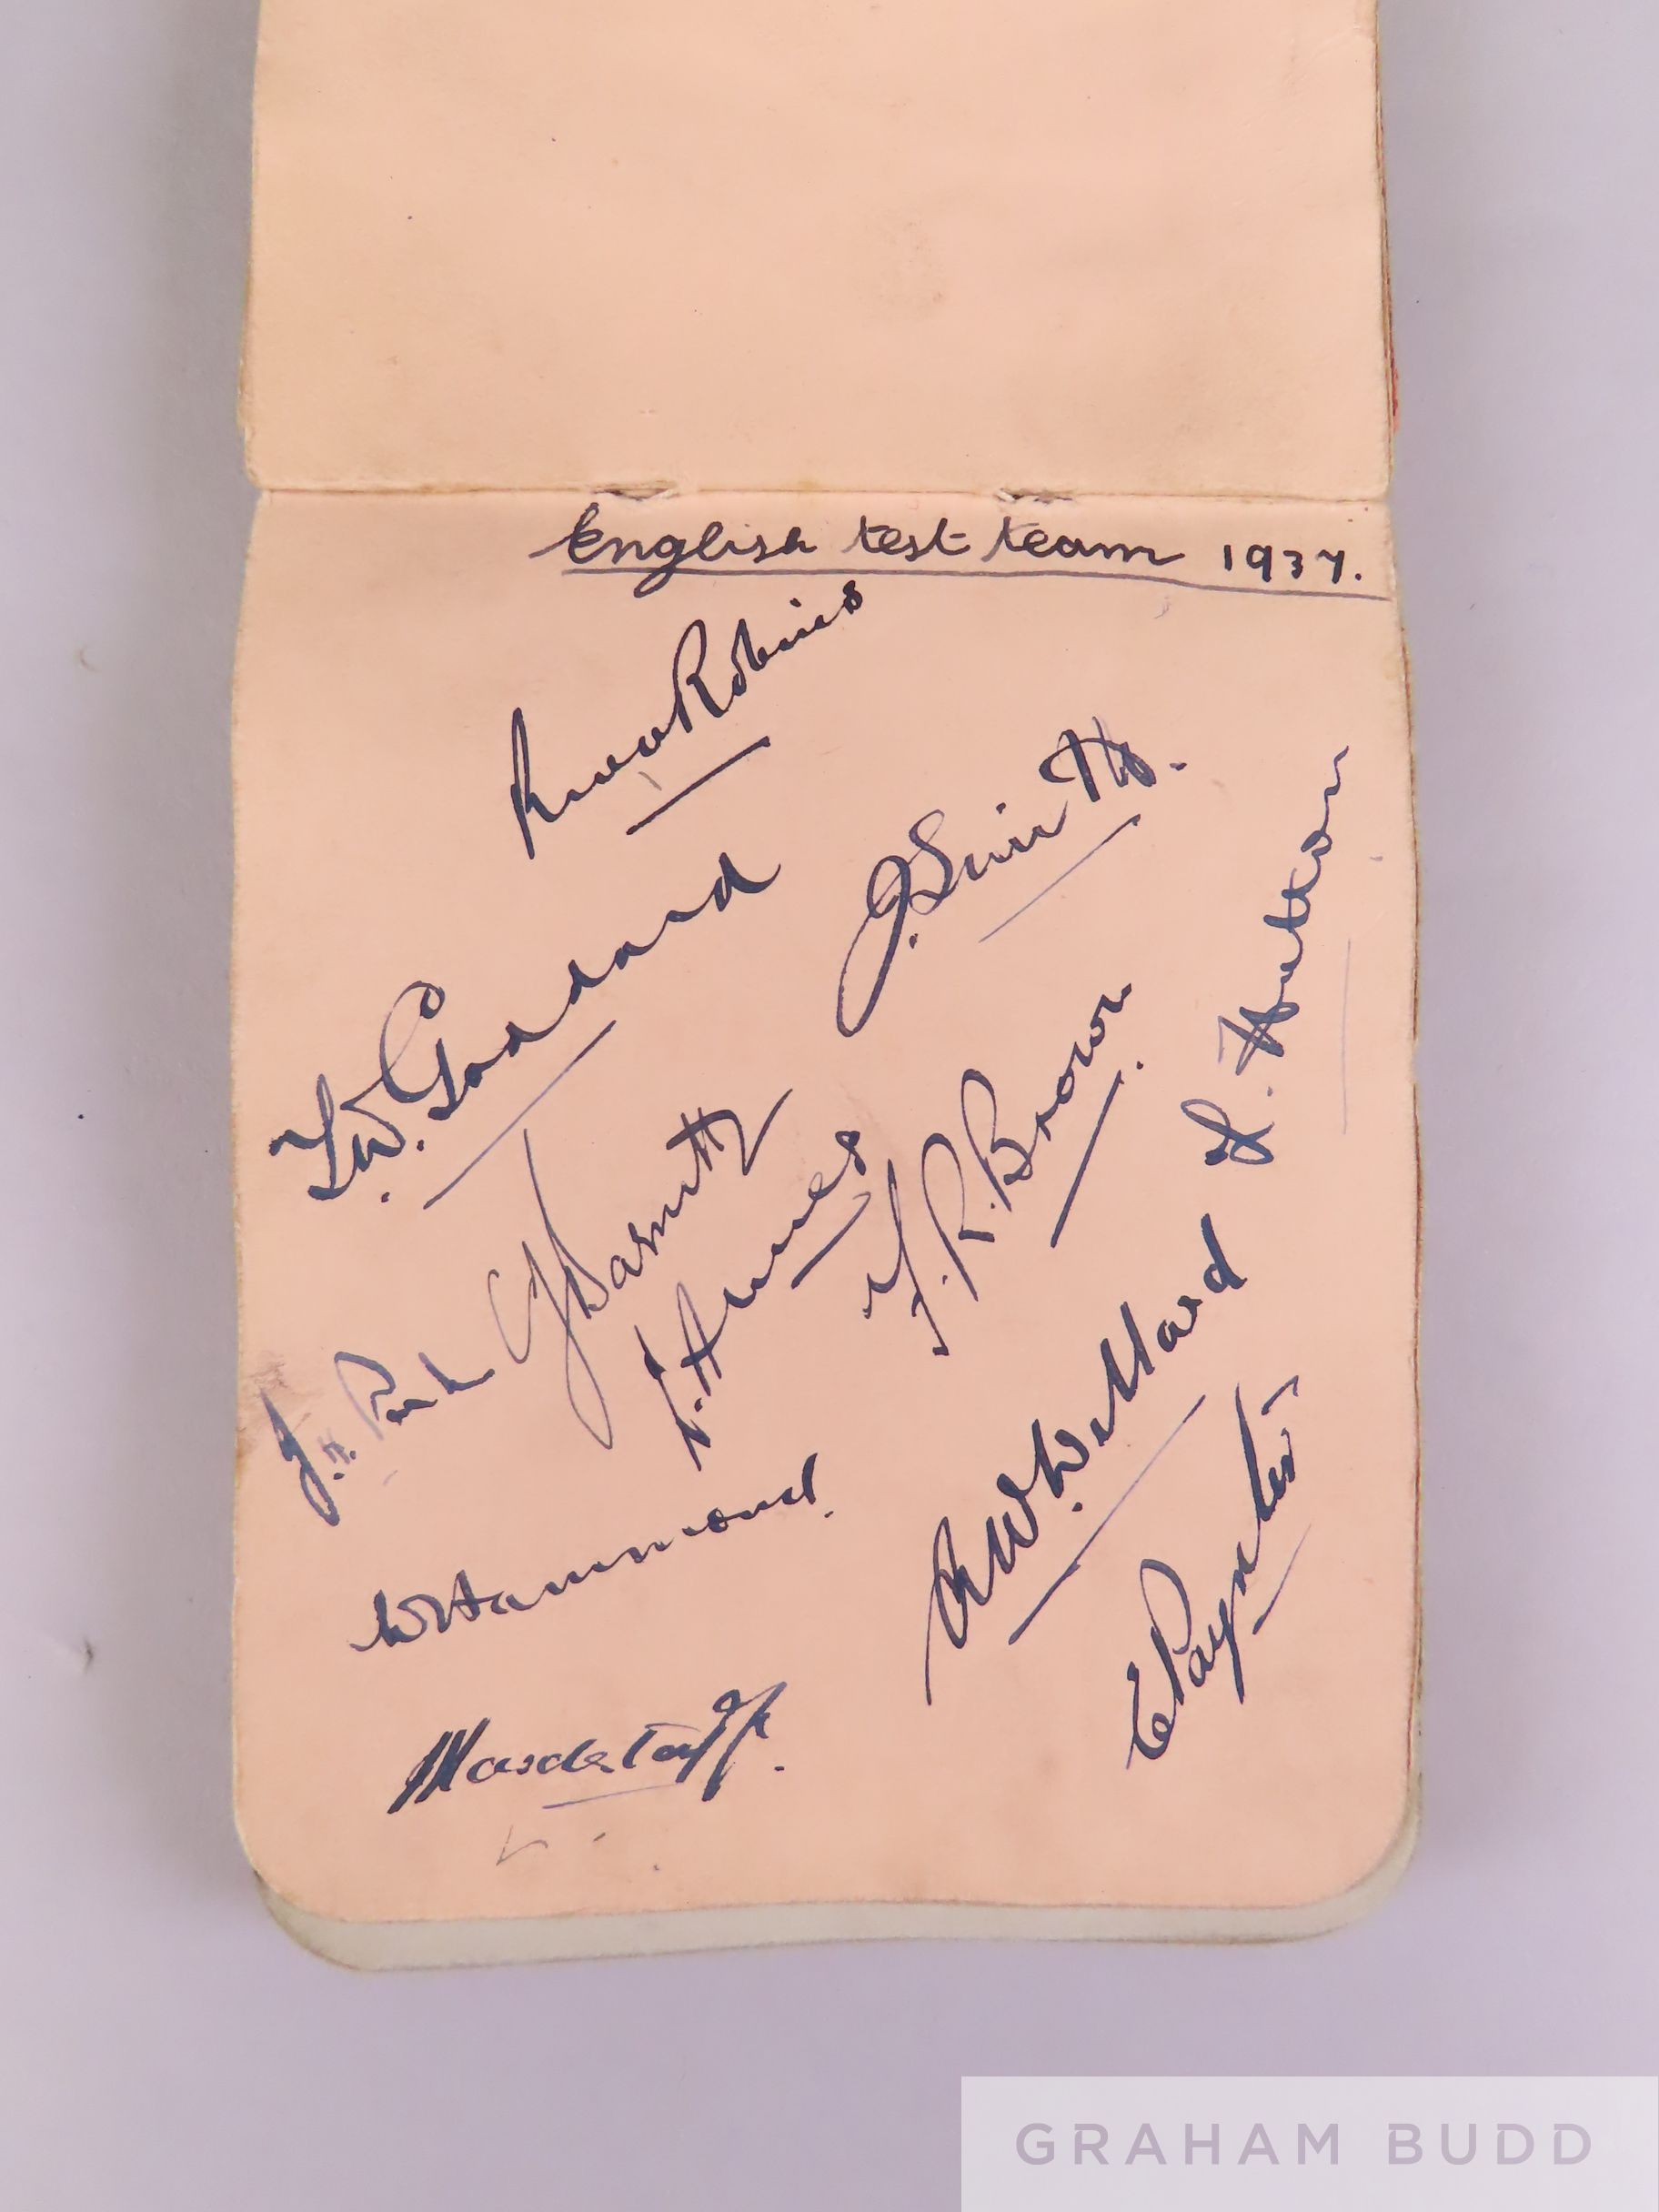 An album of cricket team autographs from 1937-38 - Image 3 of 4